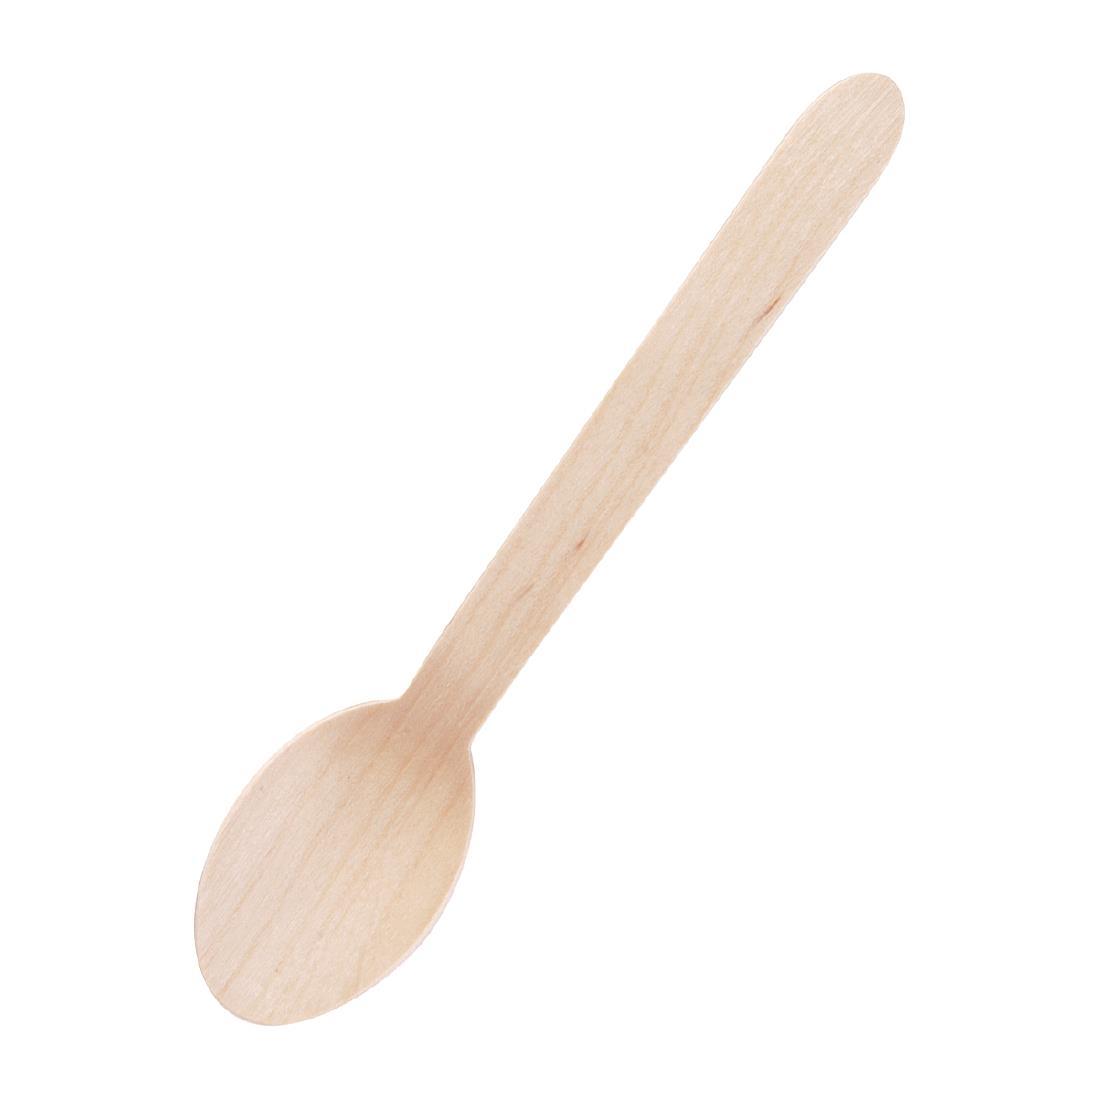 Fiesta Compostable Disposable Wooden Dessert Spoons (Pack of 100) - CD904  - 1